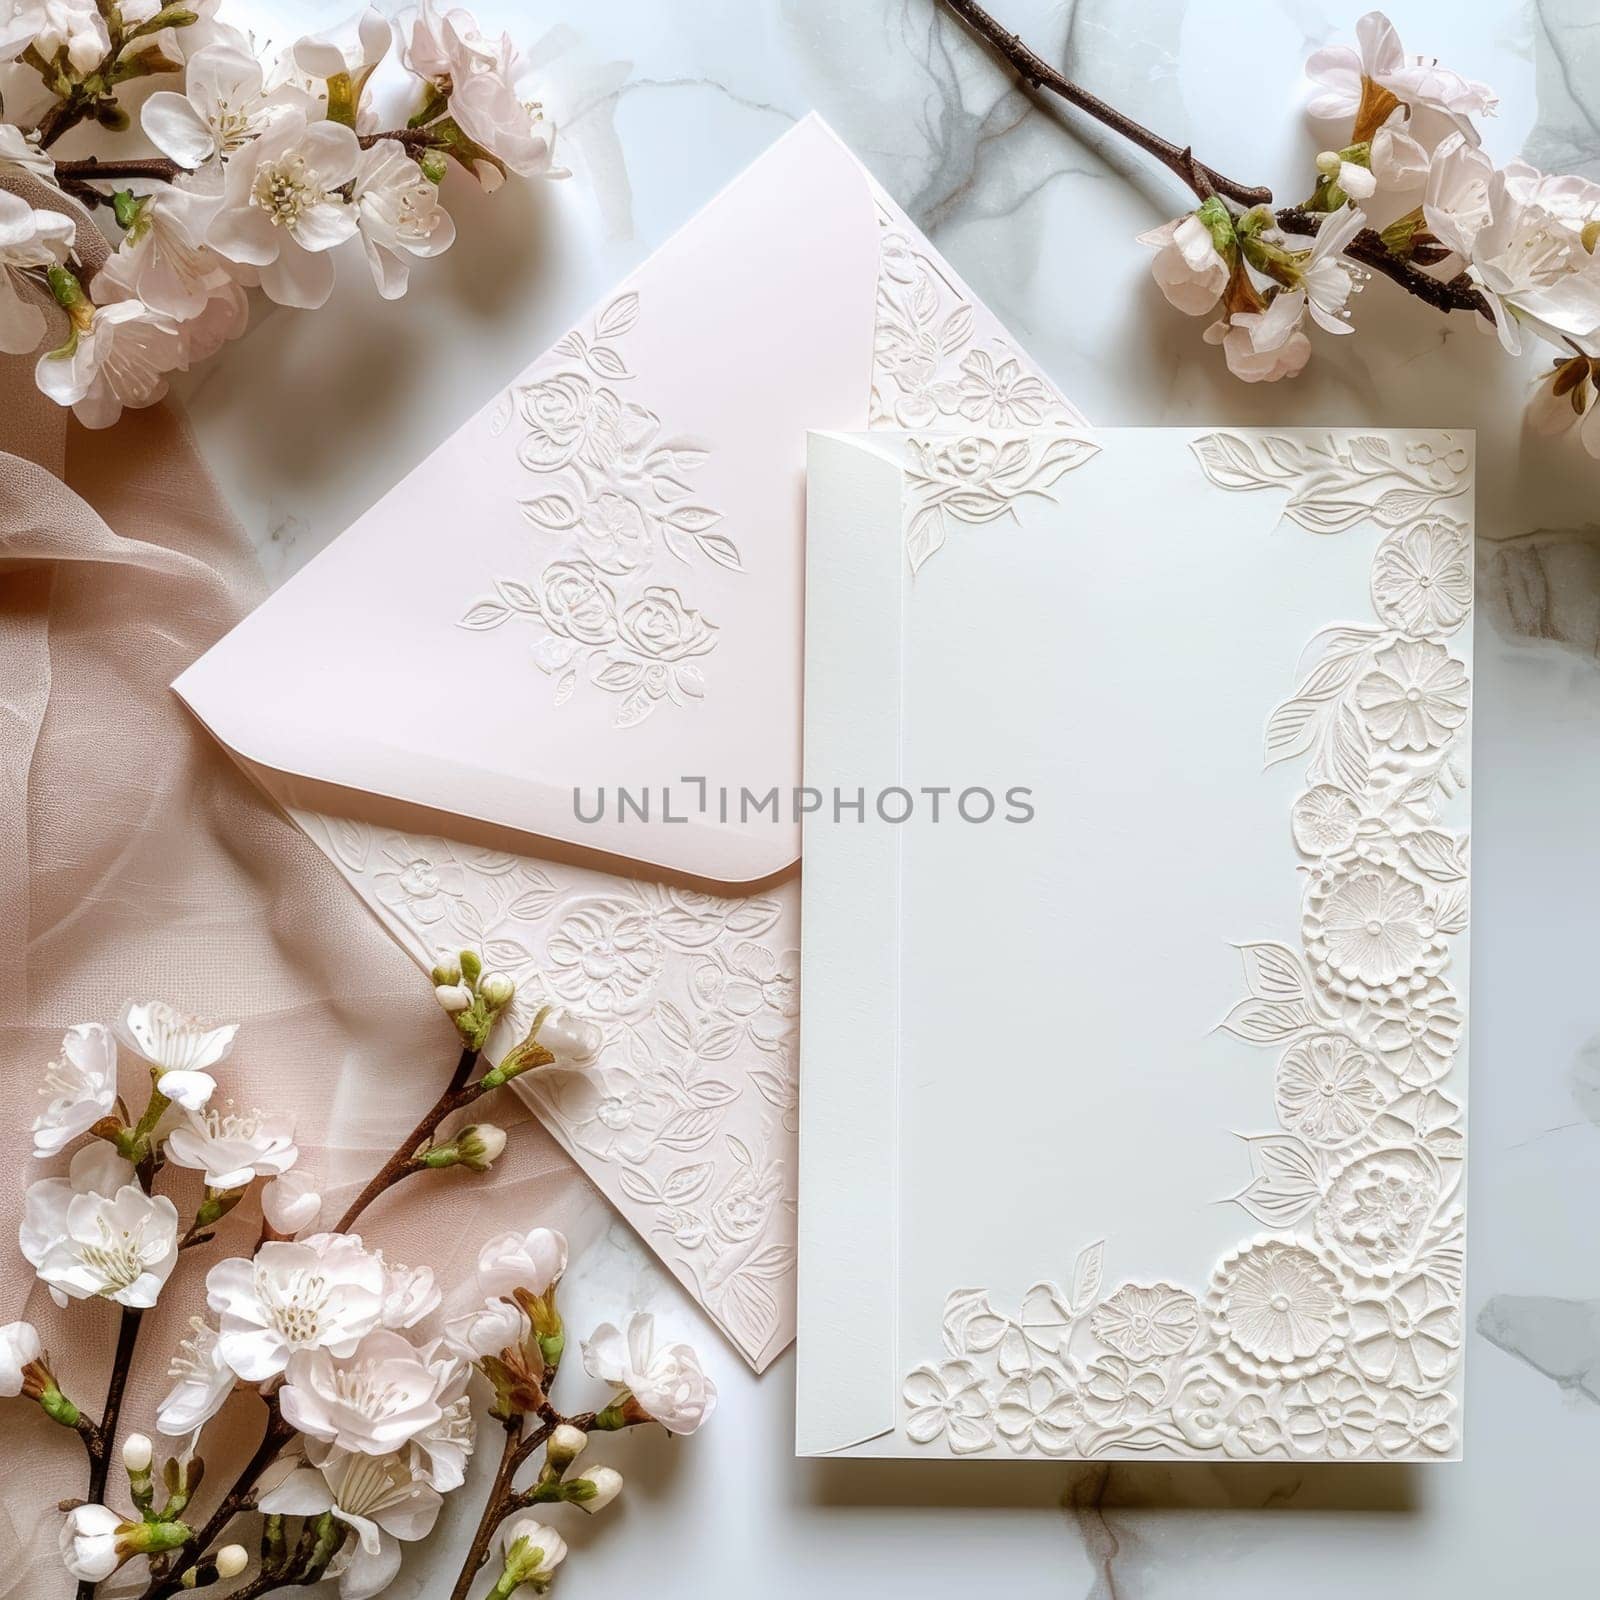 A minimalist wedding invitation card, elegantly designed with a white floral embossed pattern, complemented by a pastel envelope and cherry blossoms.